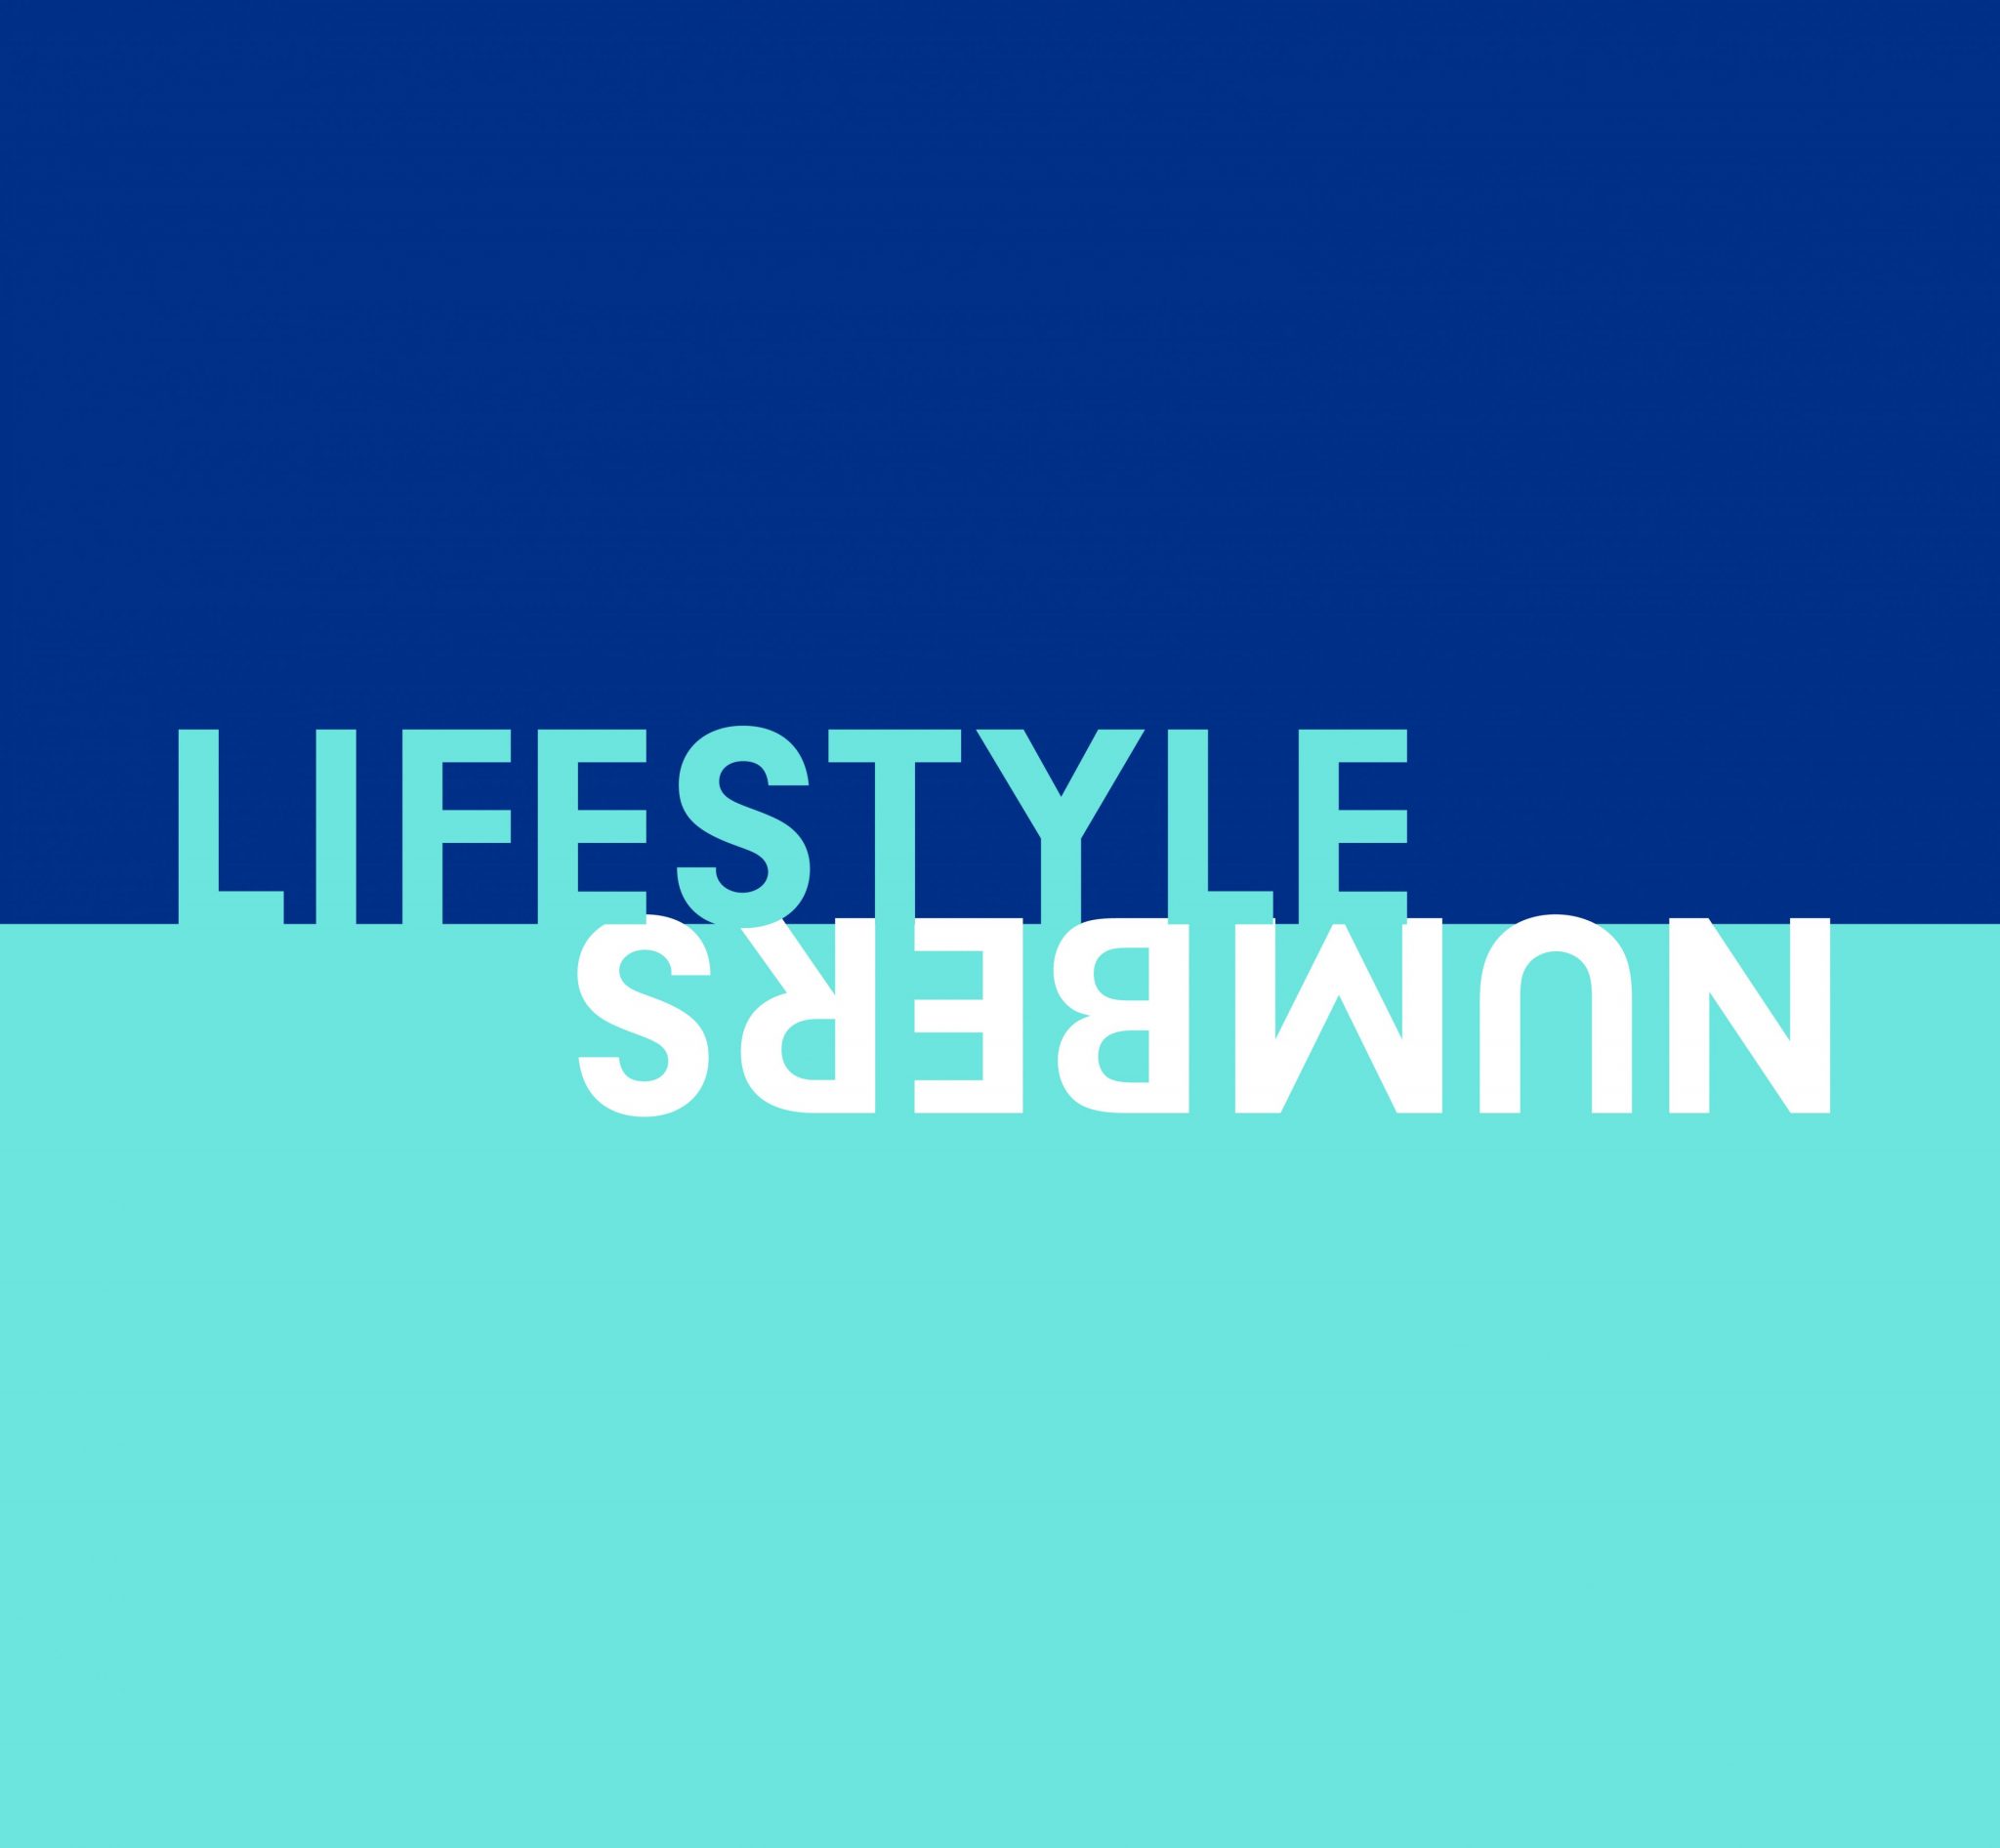 brand strategy language of lifestyle numbers - two tone blue design